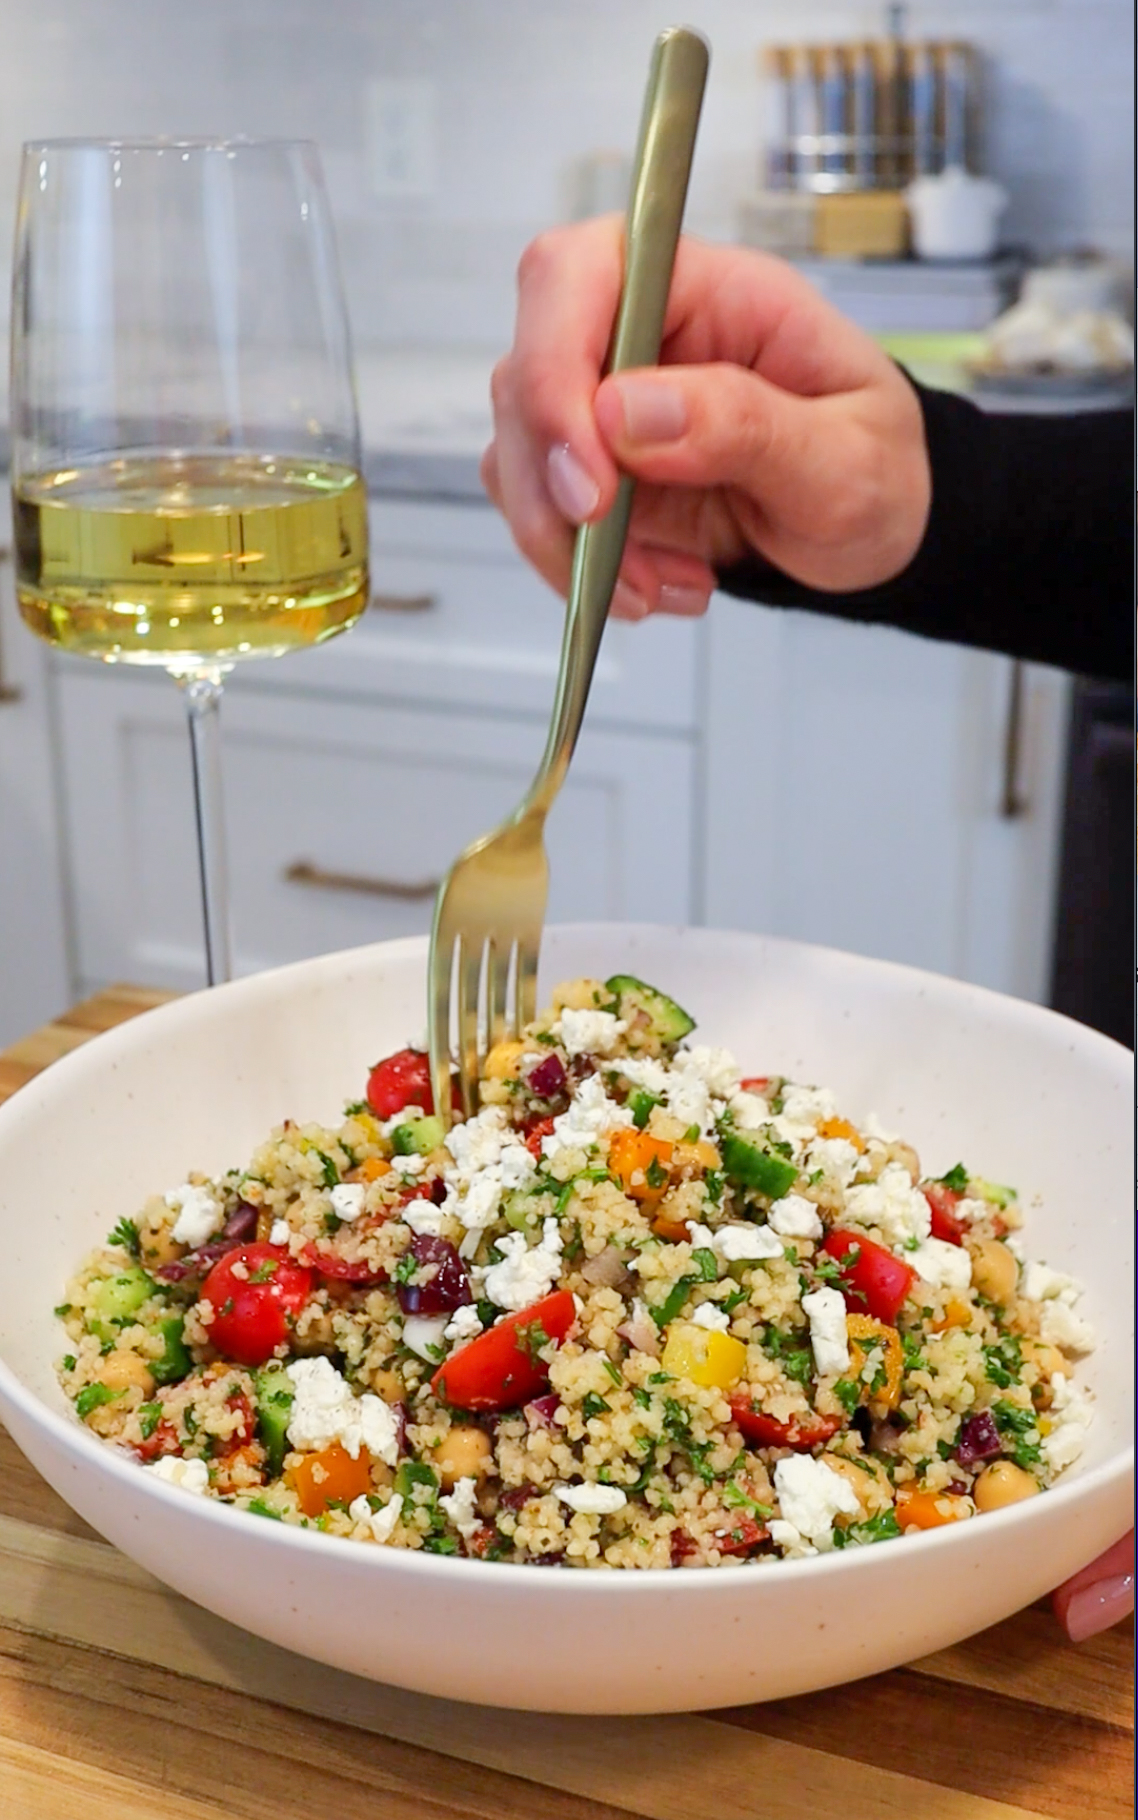 This Zesty Mediterranean Couscous Salad side dish is a great appetizer, easy, delicious, and perfect for meal prep